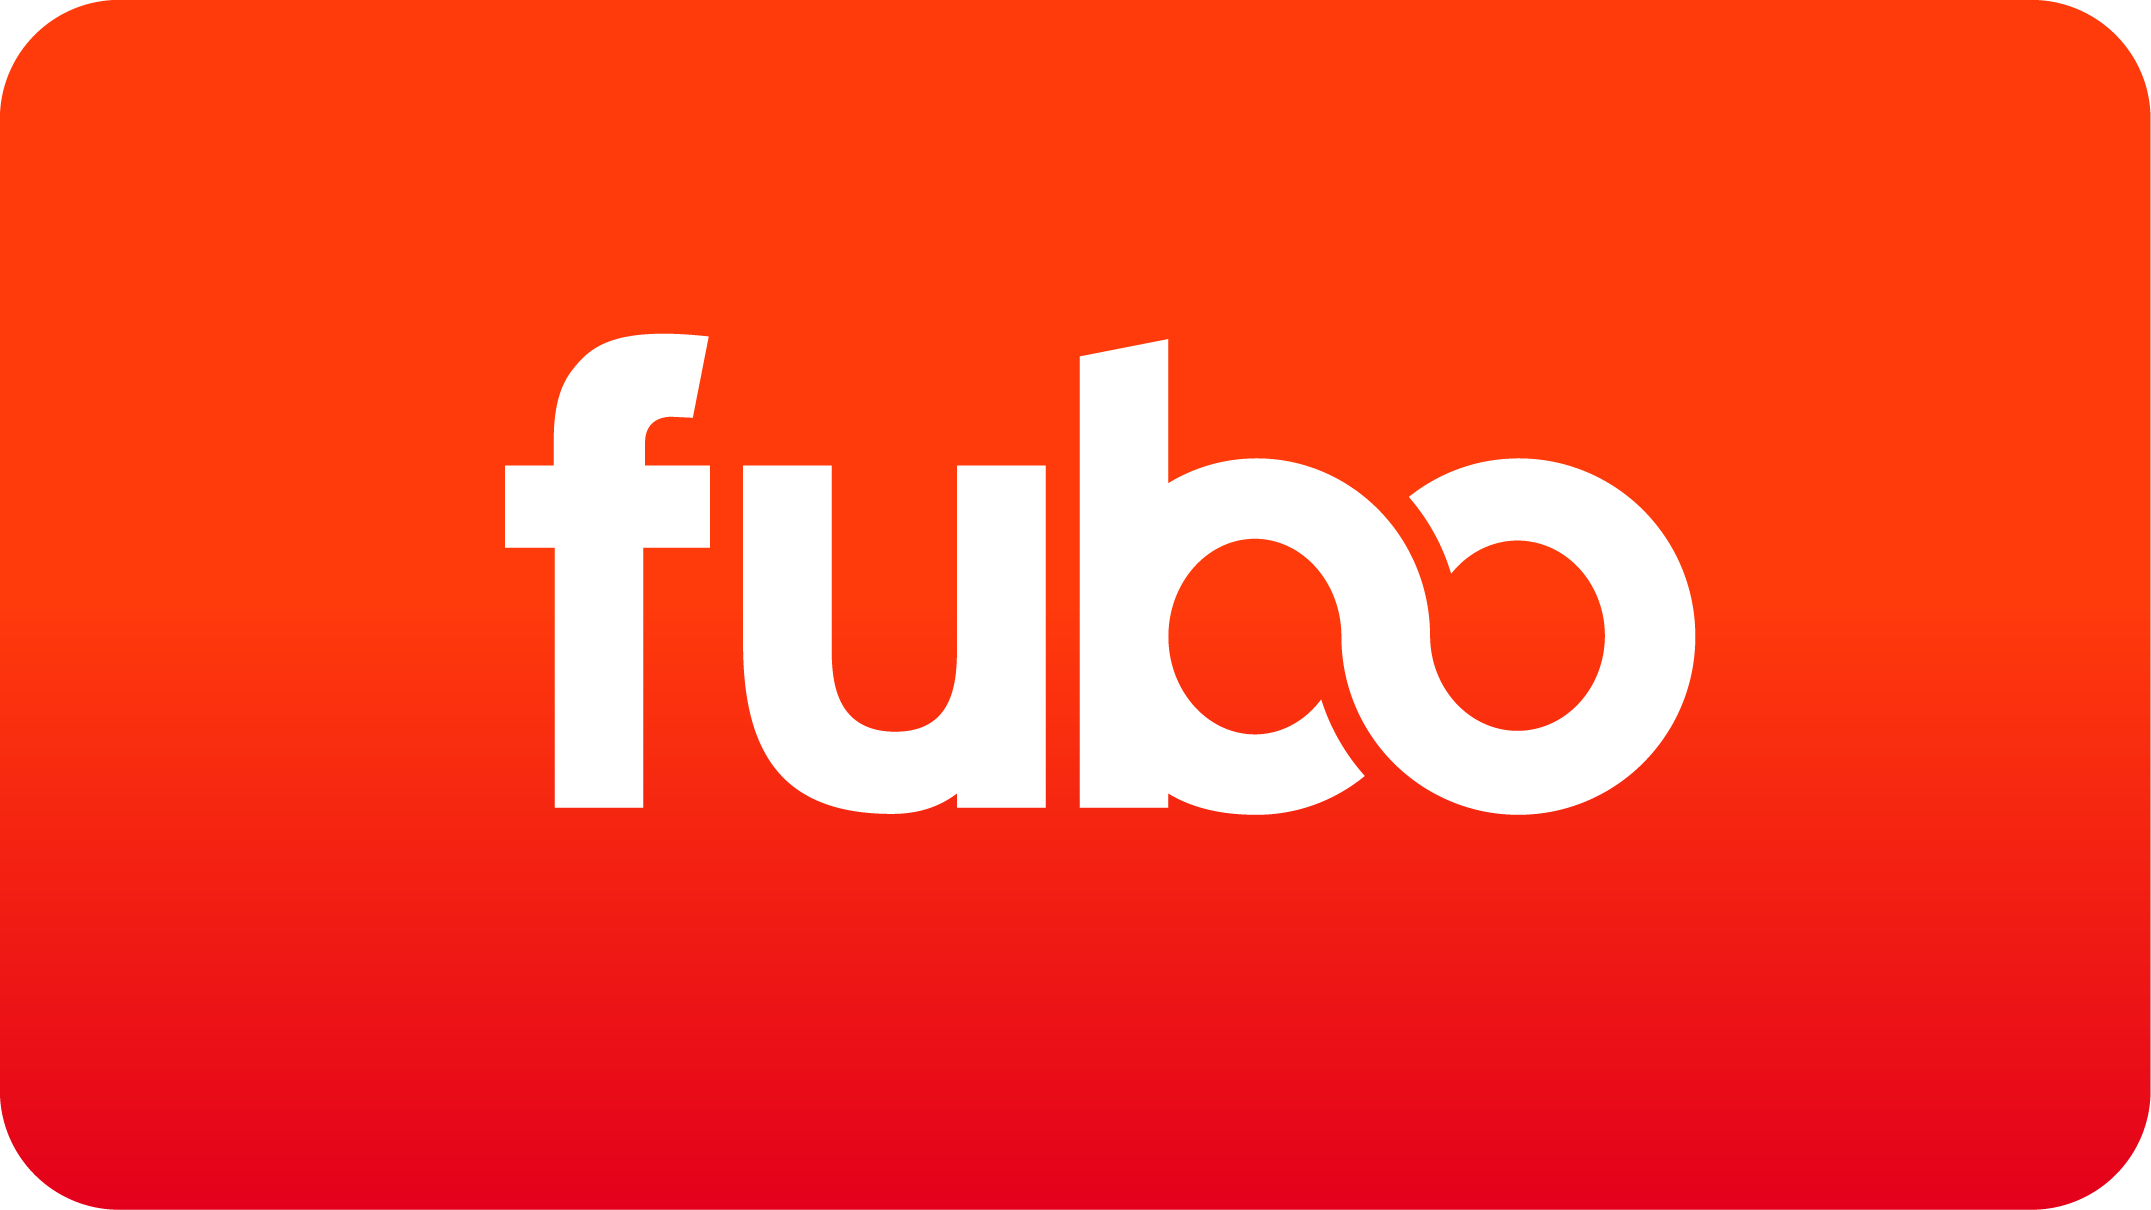 Fubo May Have a Tough Road Ahead With Disney, Fox, and Warner Bos. Discovery Streaming Lawsuit